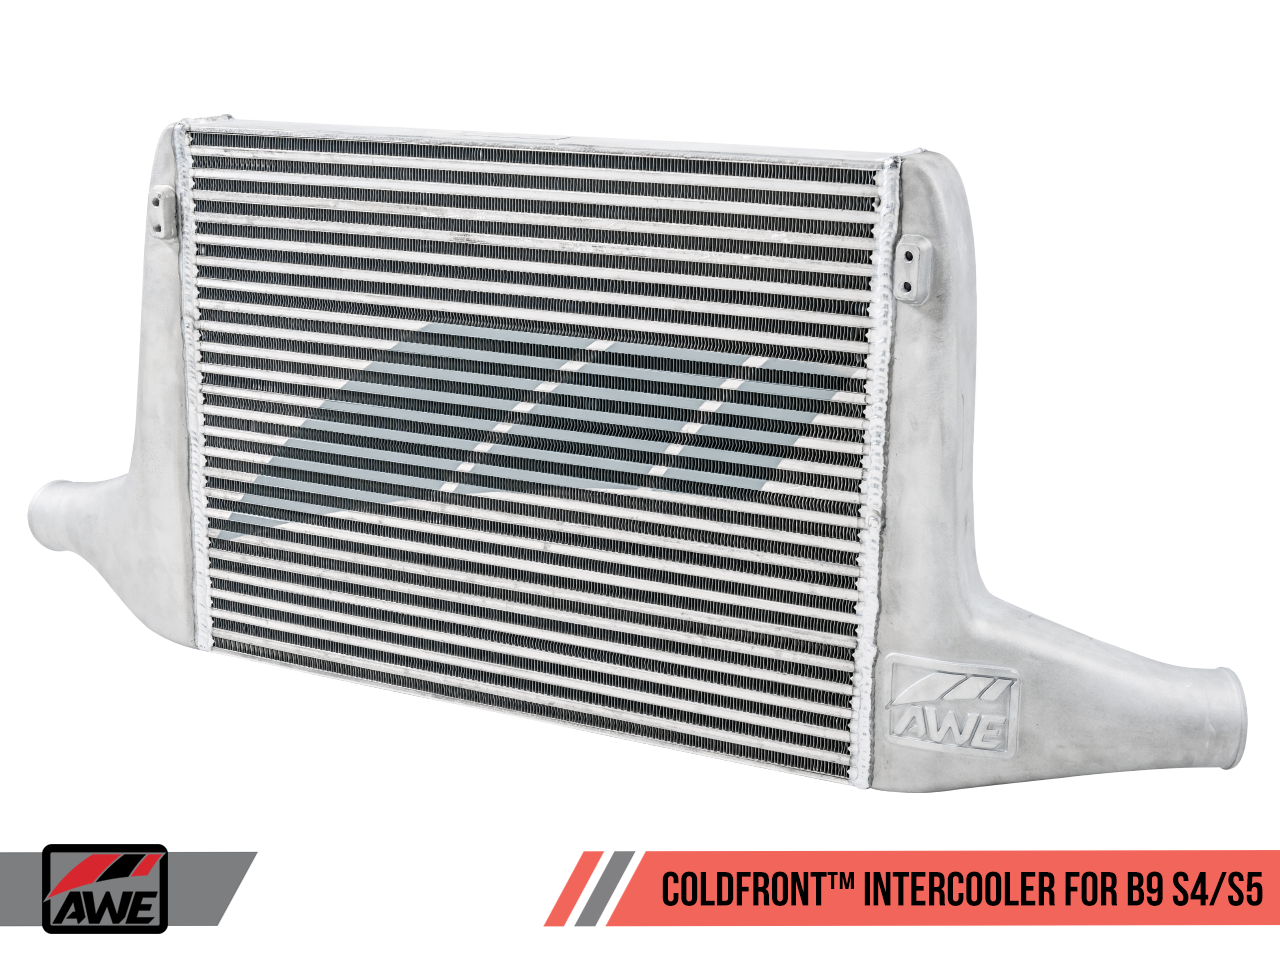 AWE ColdFront™ Intercooler for the Audi B9 S4 / S5 3.0T